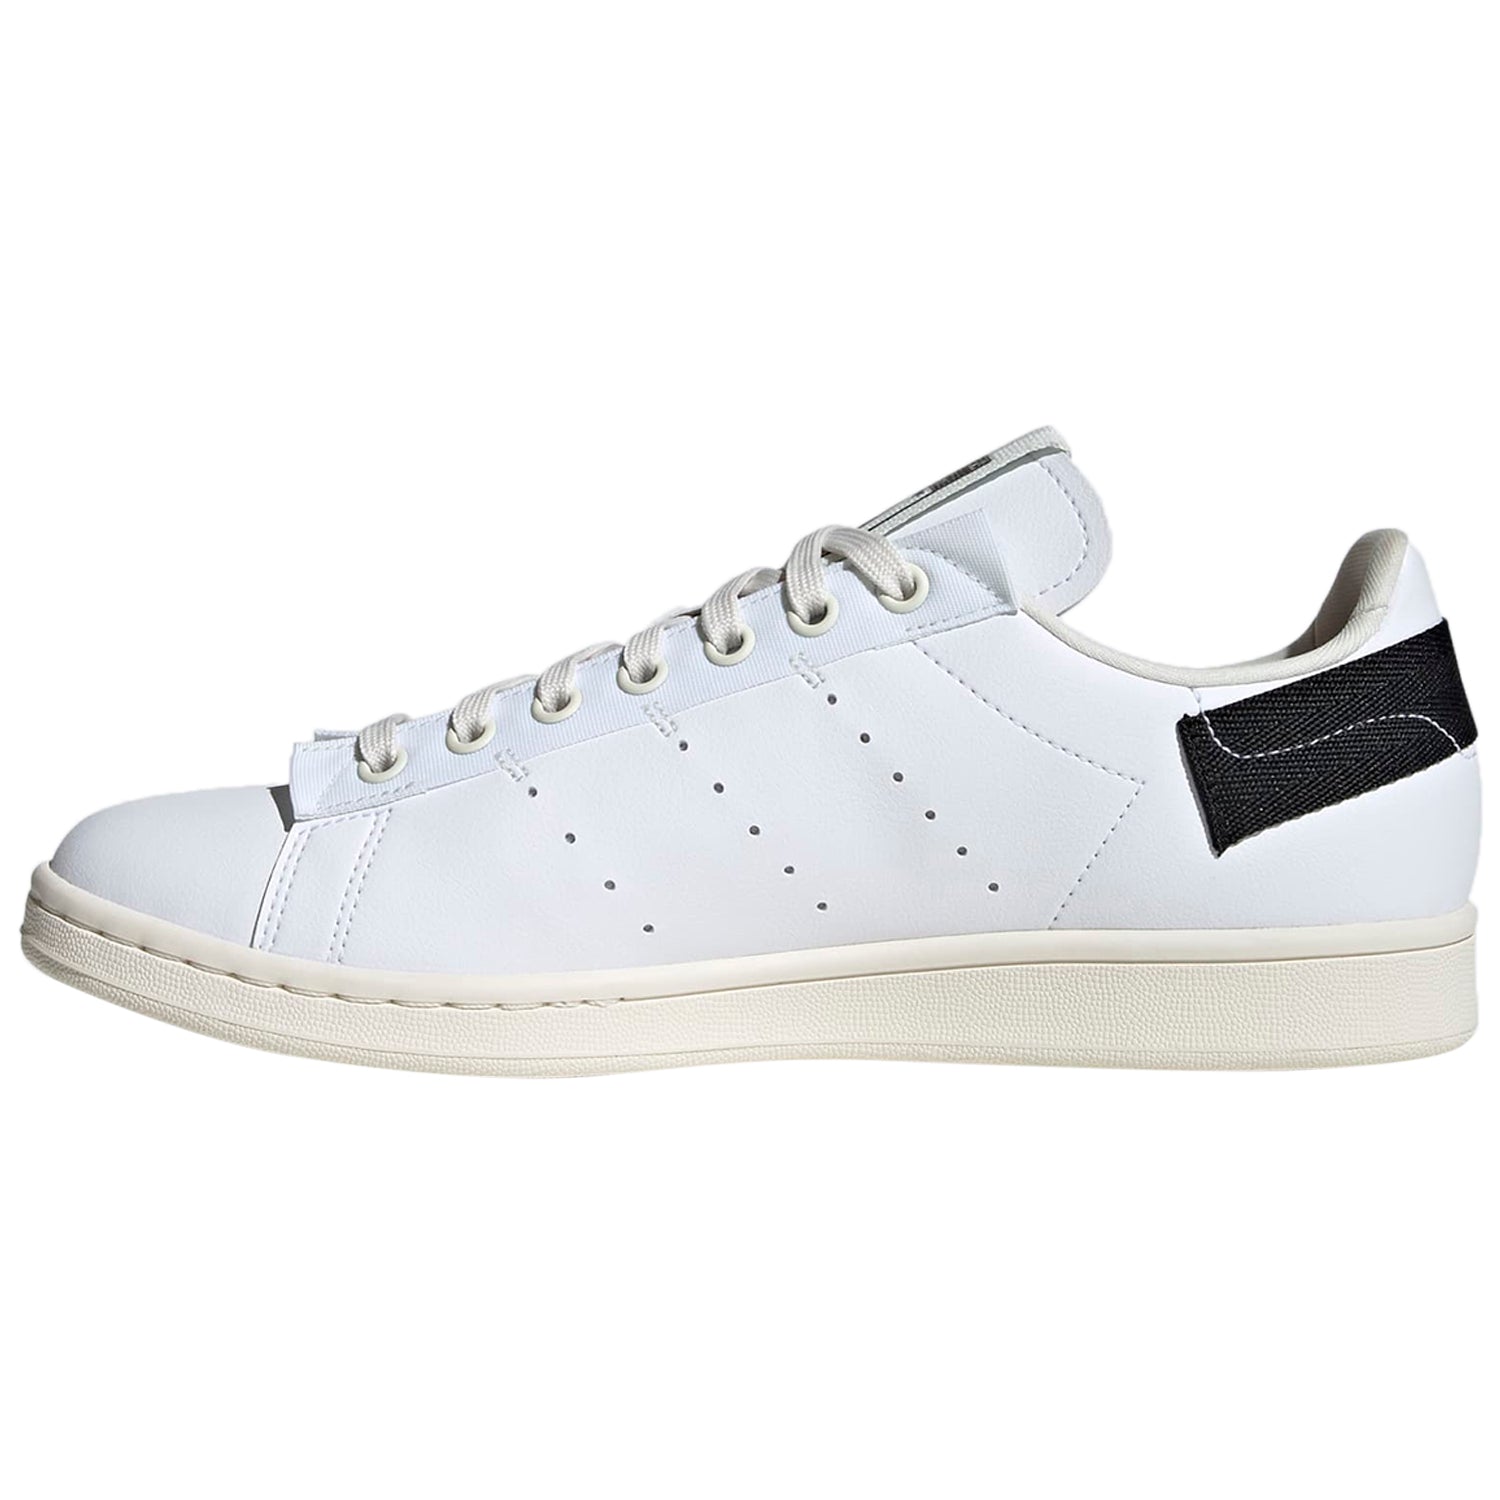 Adidas Stan Smith Parley Mens Style : Gv7614